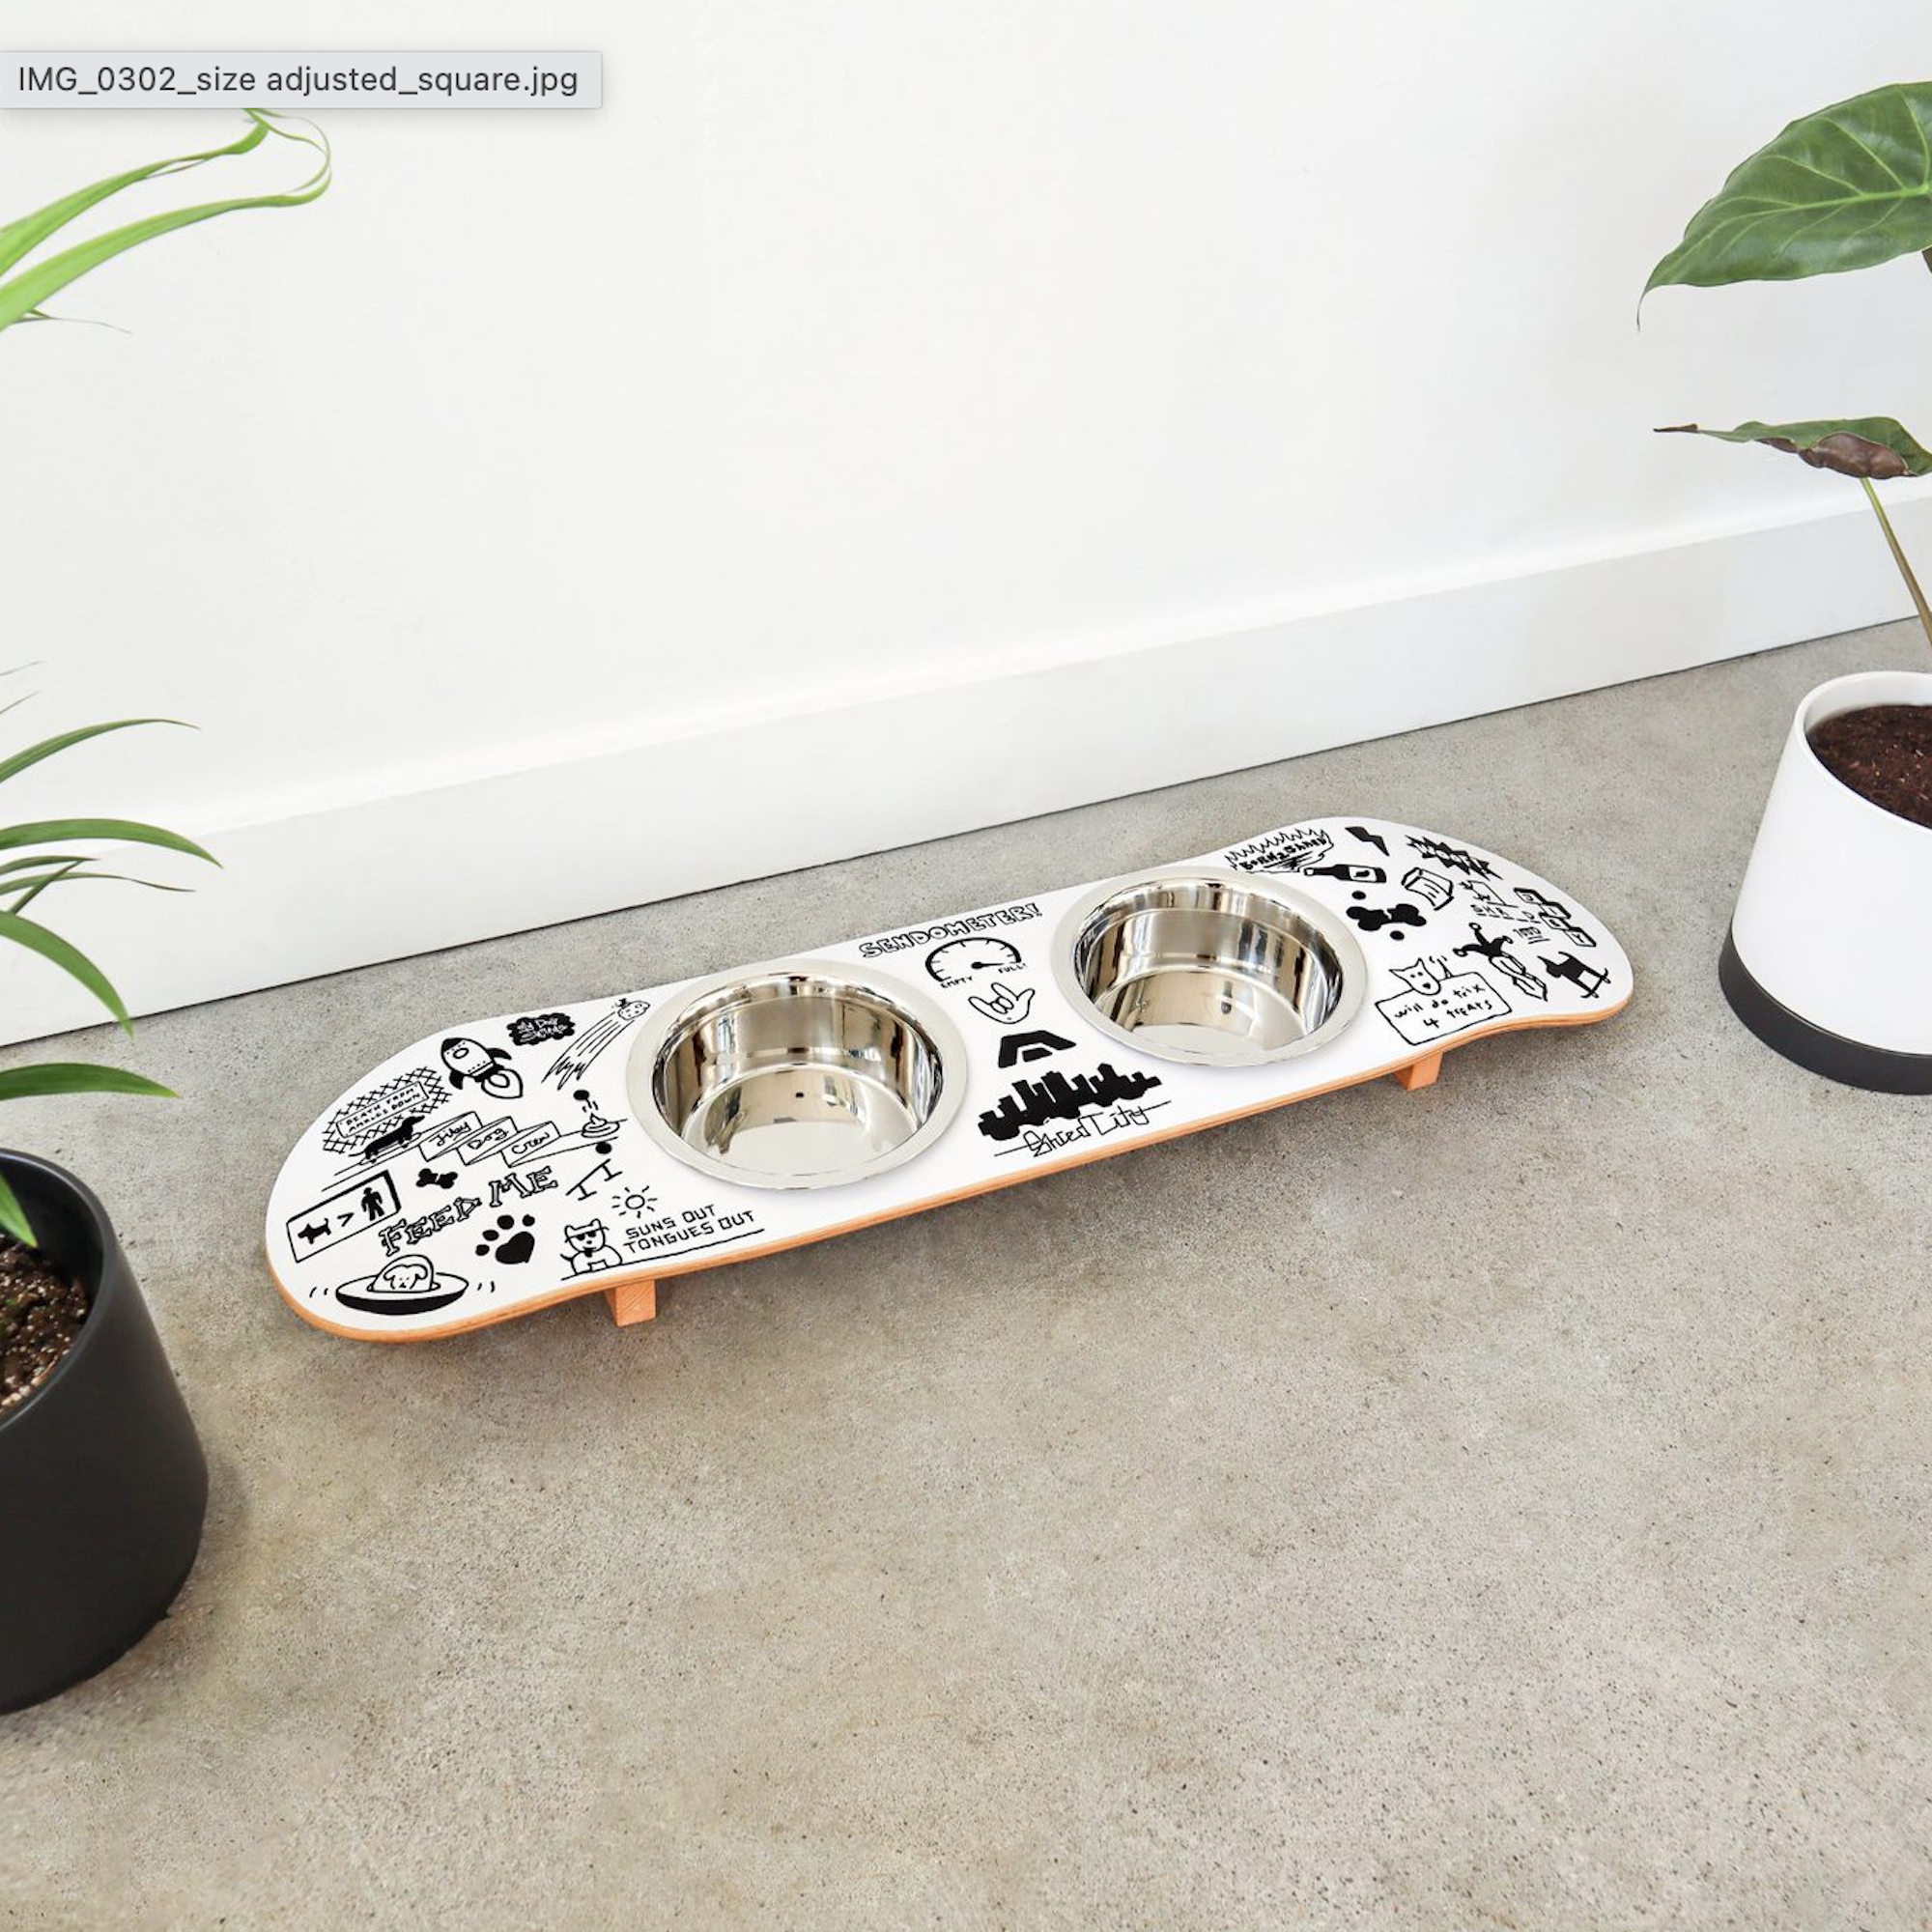 https://images.baxterboo.com/global/images/products/large/jiby-dog-crew-skatebowl-doodle-6986.png